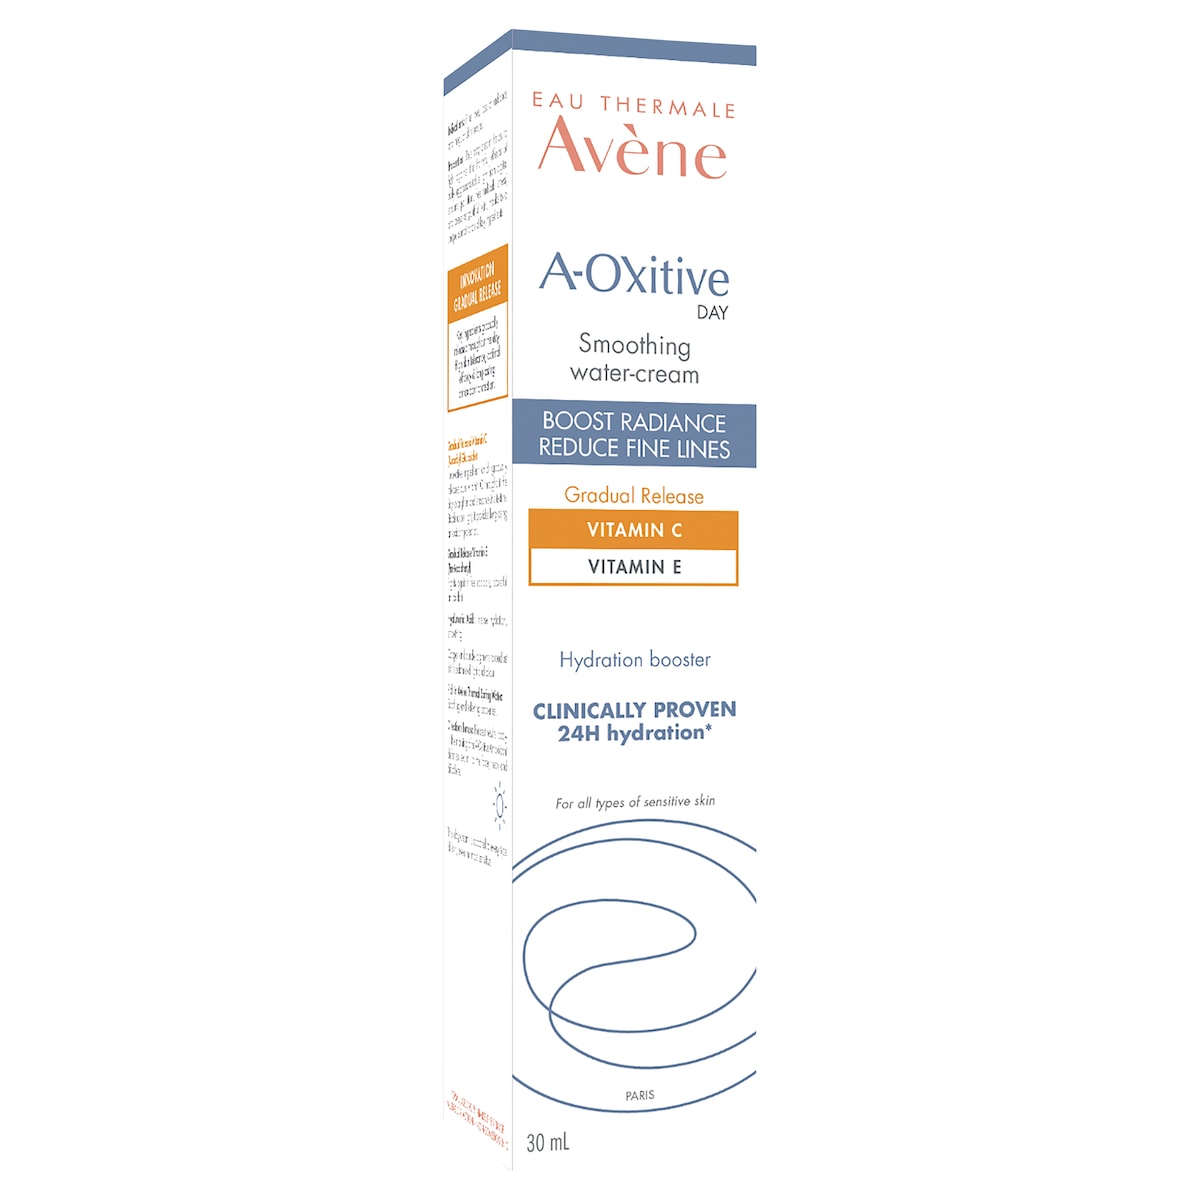 Avene A-Oxitive Day Smoothing Water-Cream 30Ml